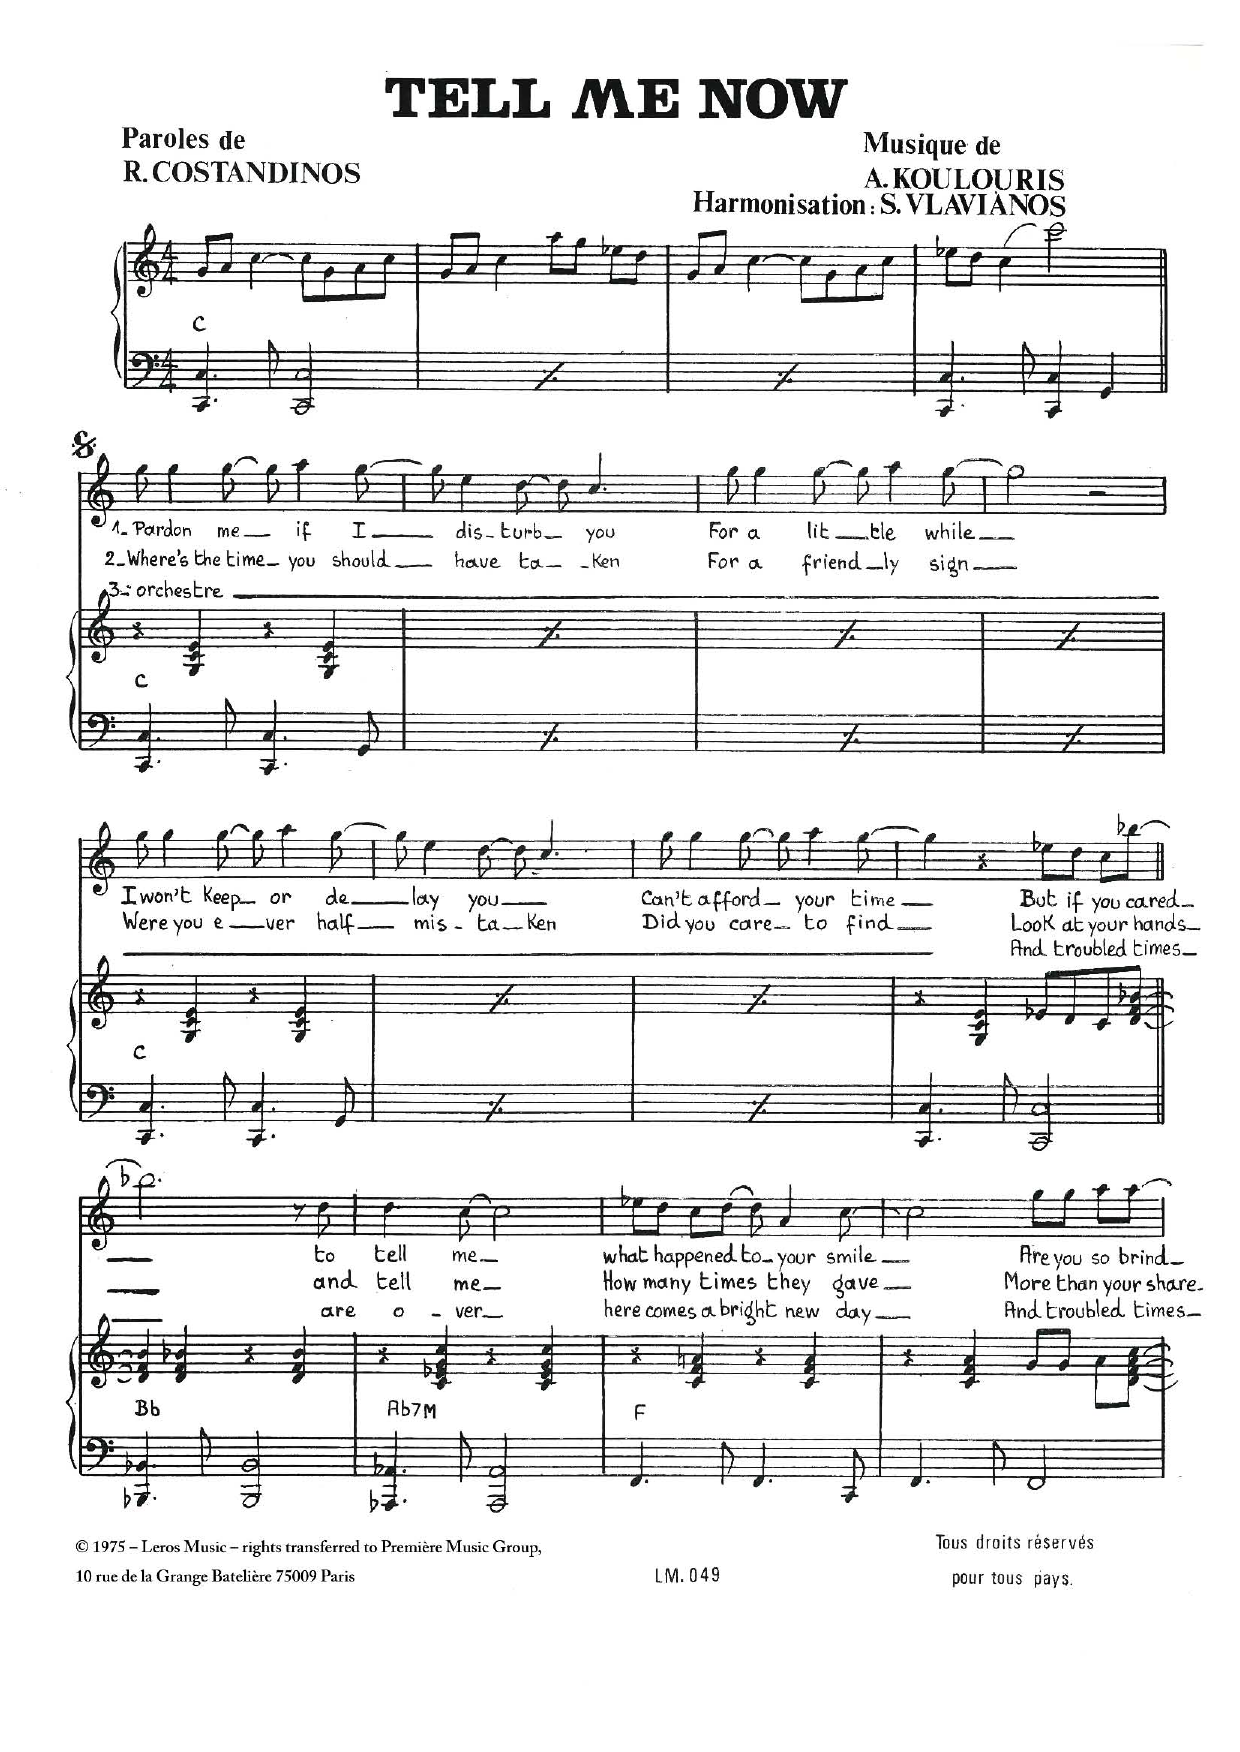 Download A Koulouris Tell Me Now Sheet Music